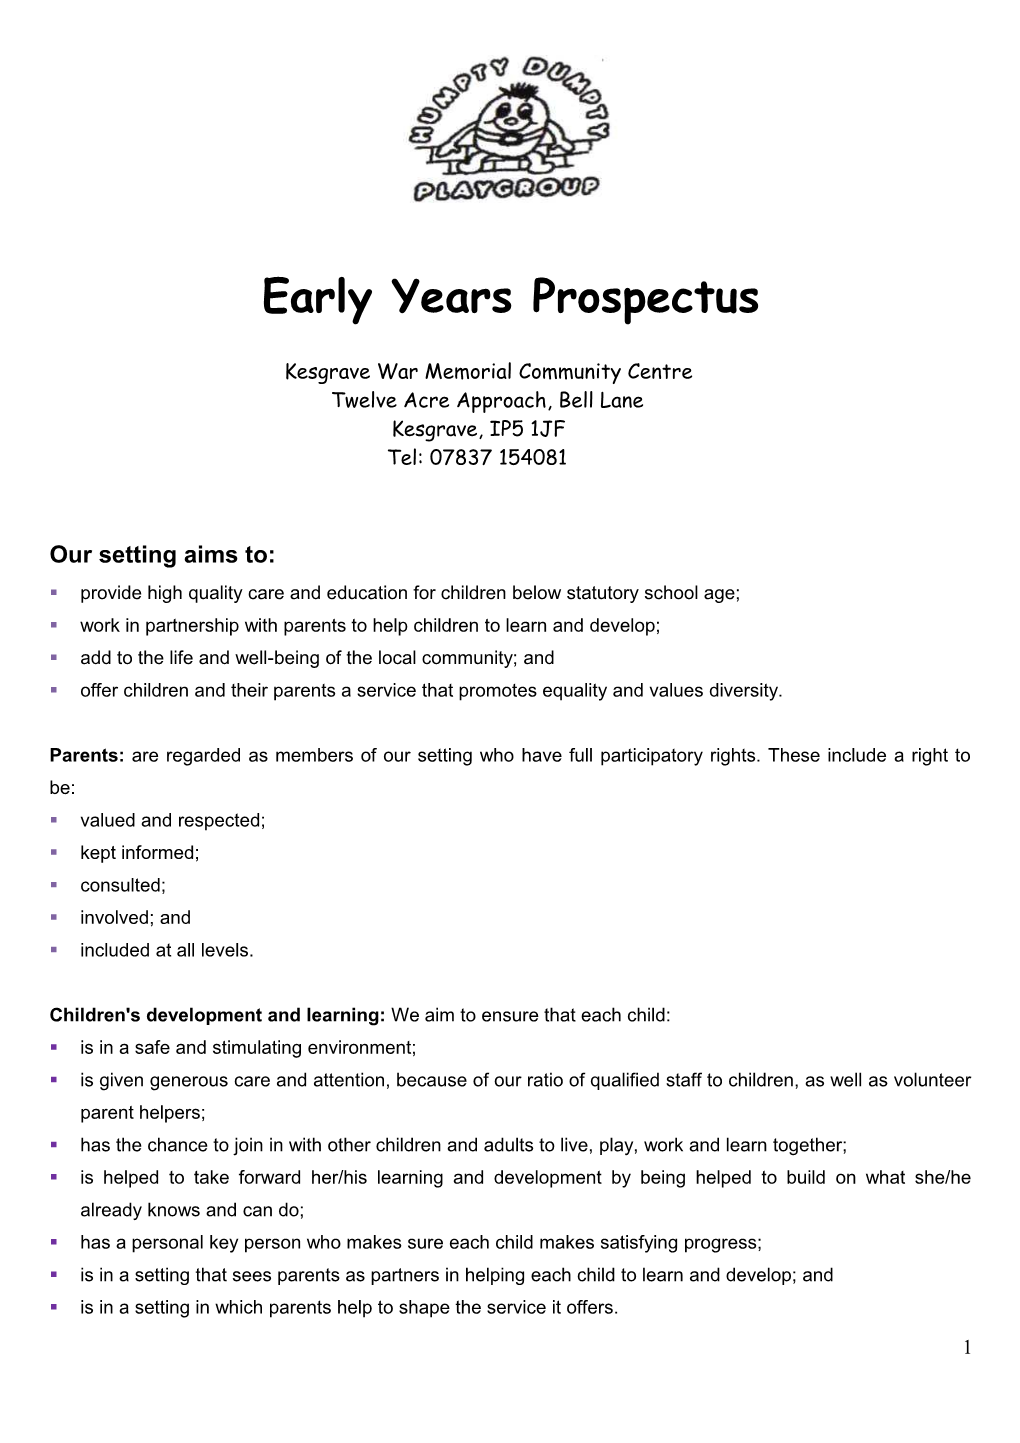 Early Years Setting Prospectus